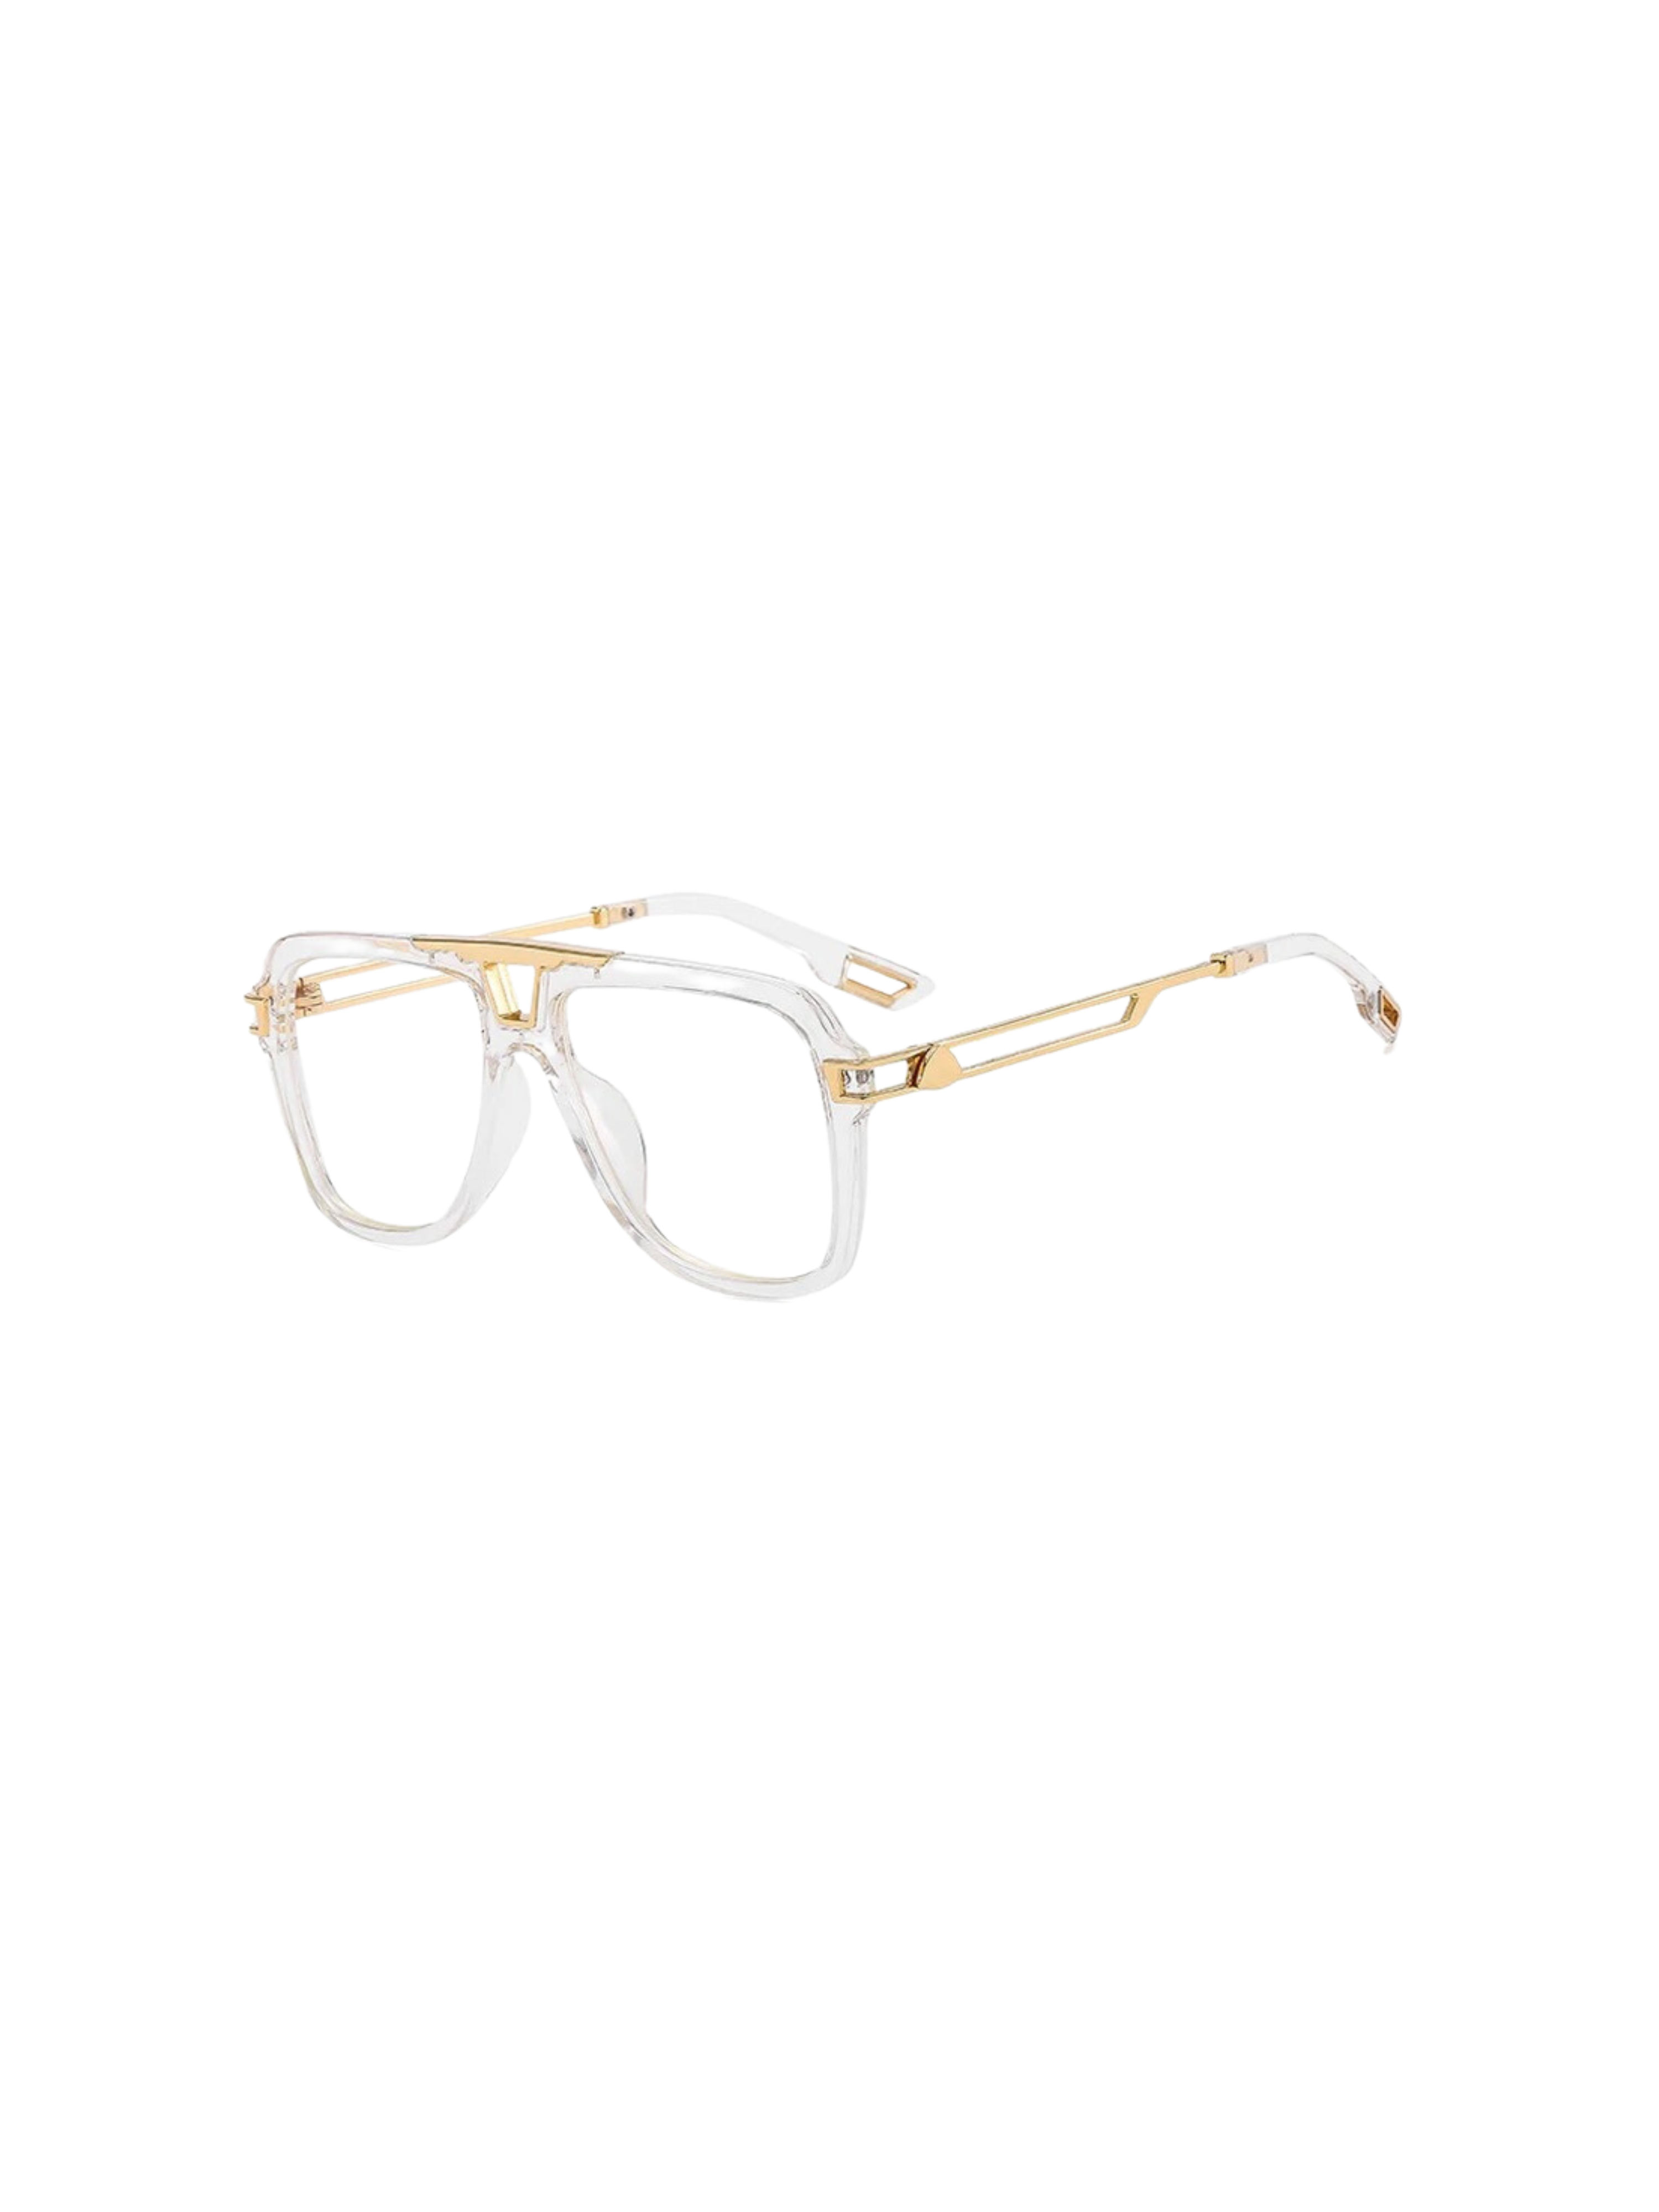 GOLDxTEAL clear frame rounded sunglasses with gold tone metal accents.